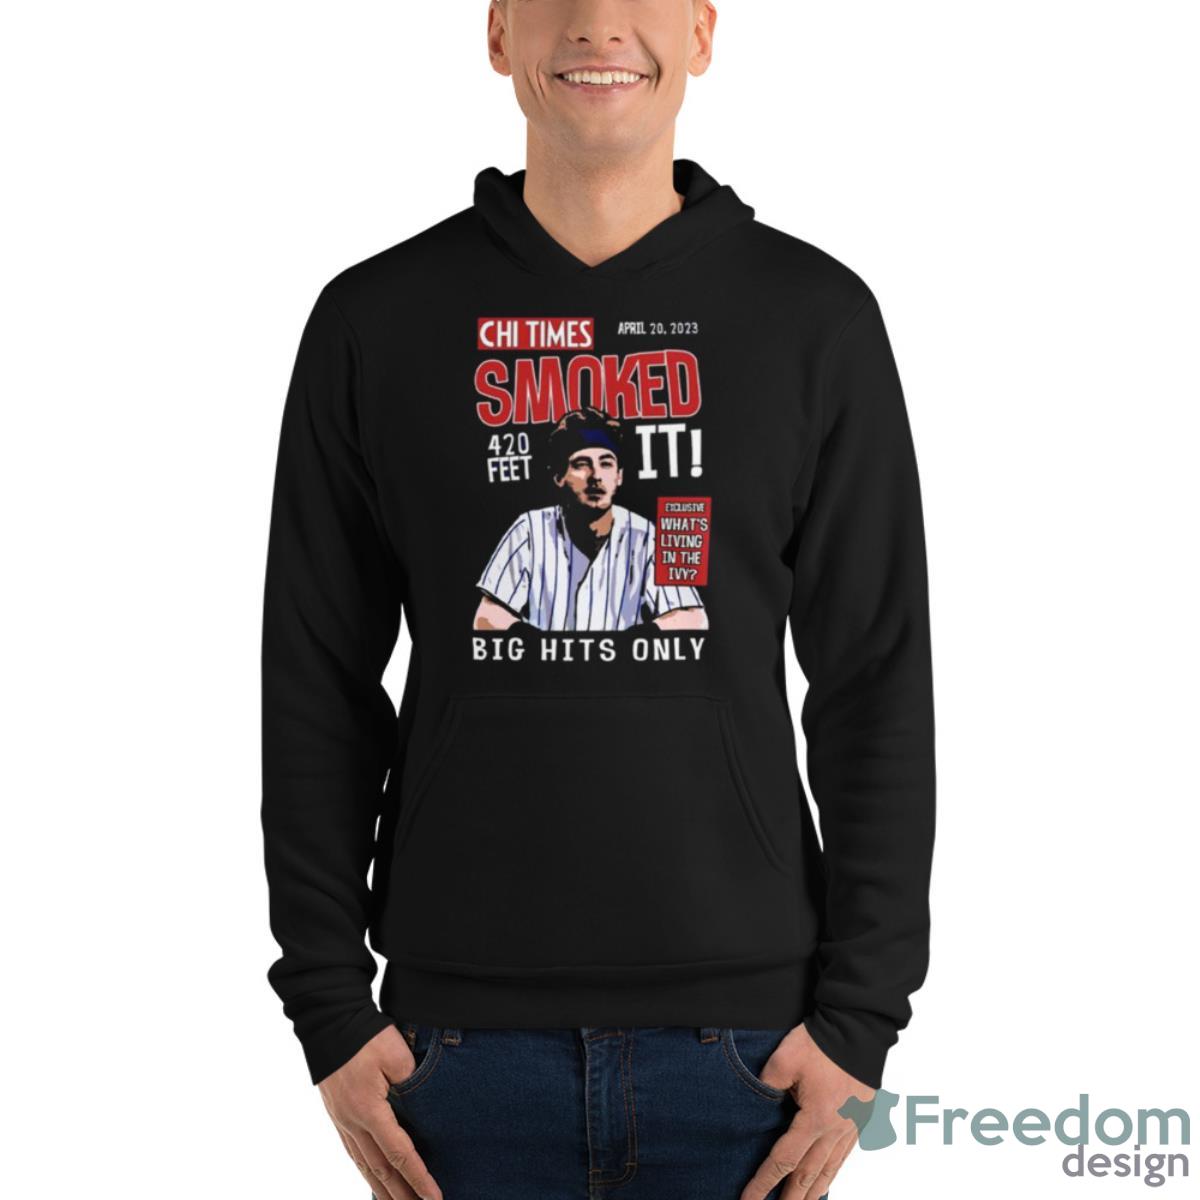 CHI Times Cody Bellinger Smoked It Chicago Apparel Shirt